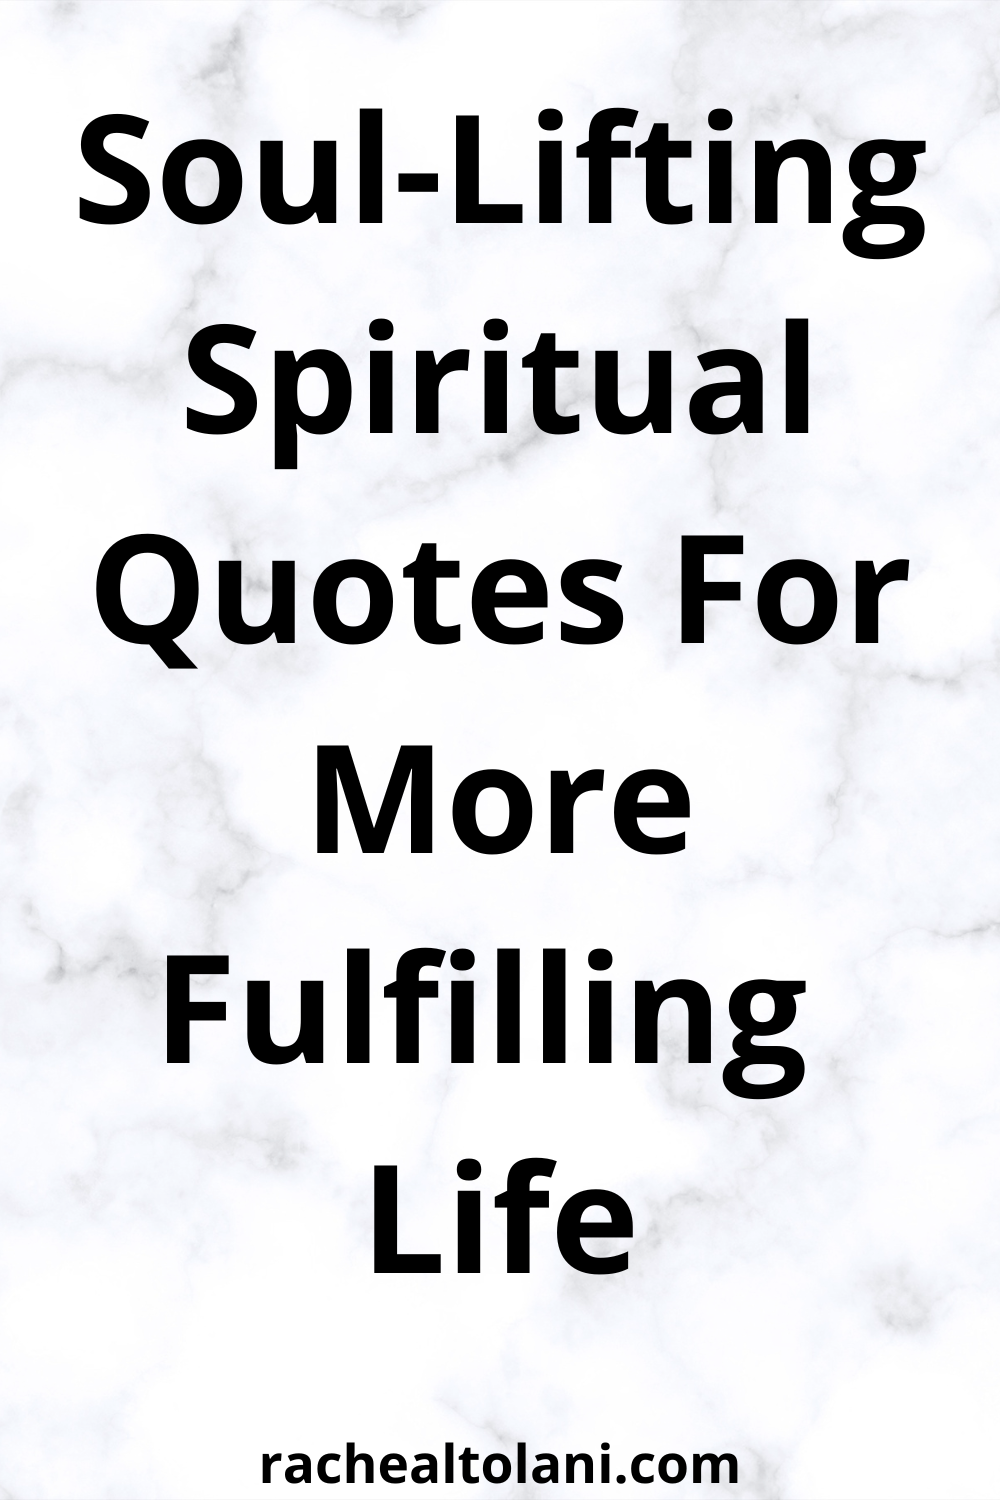 Spiritual quotes to lift up your soul